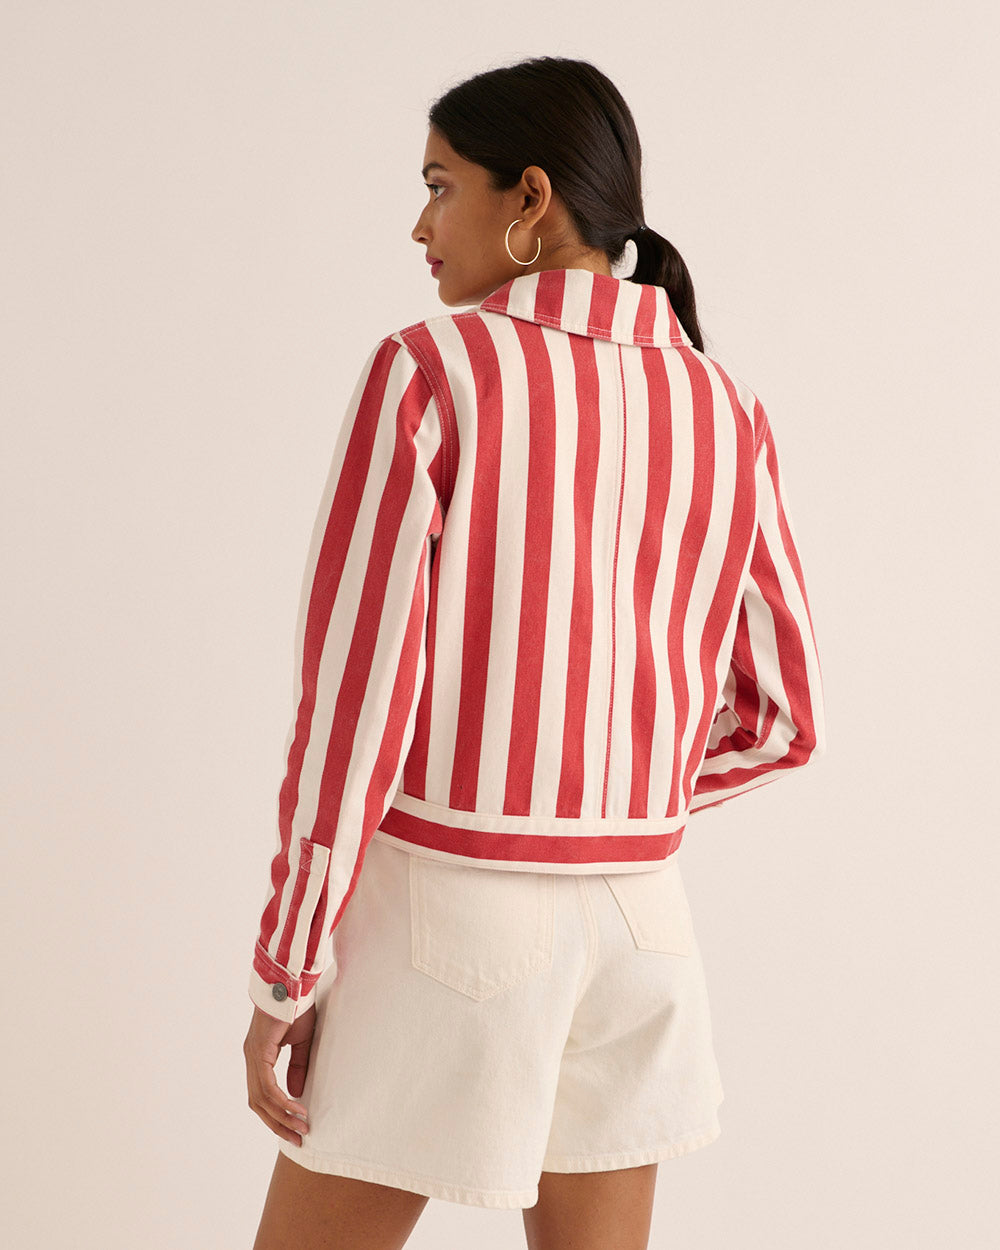 Philou jacket with red and white stripes